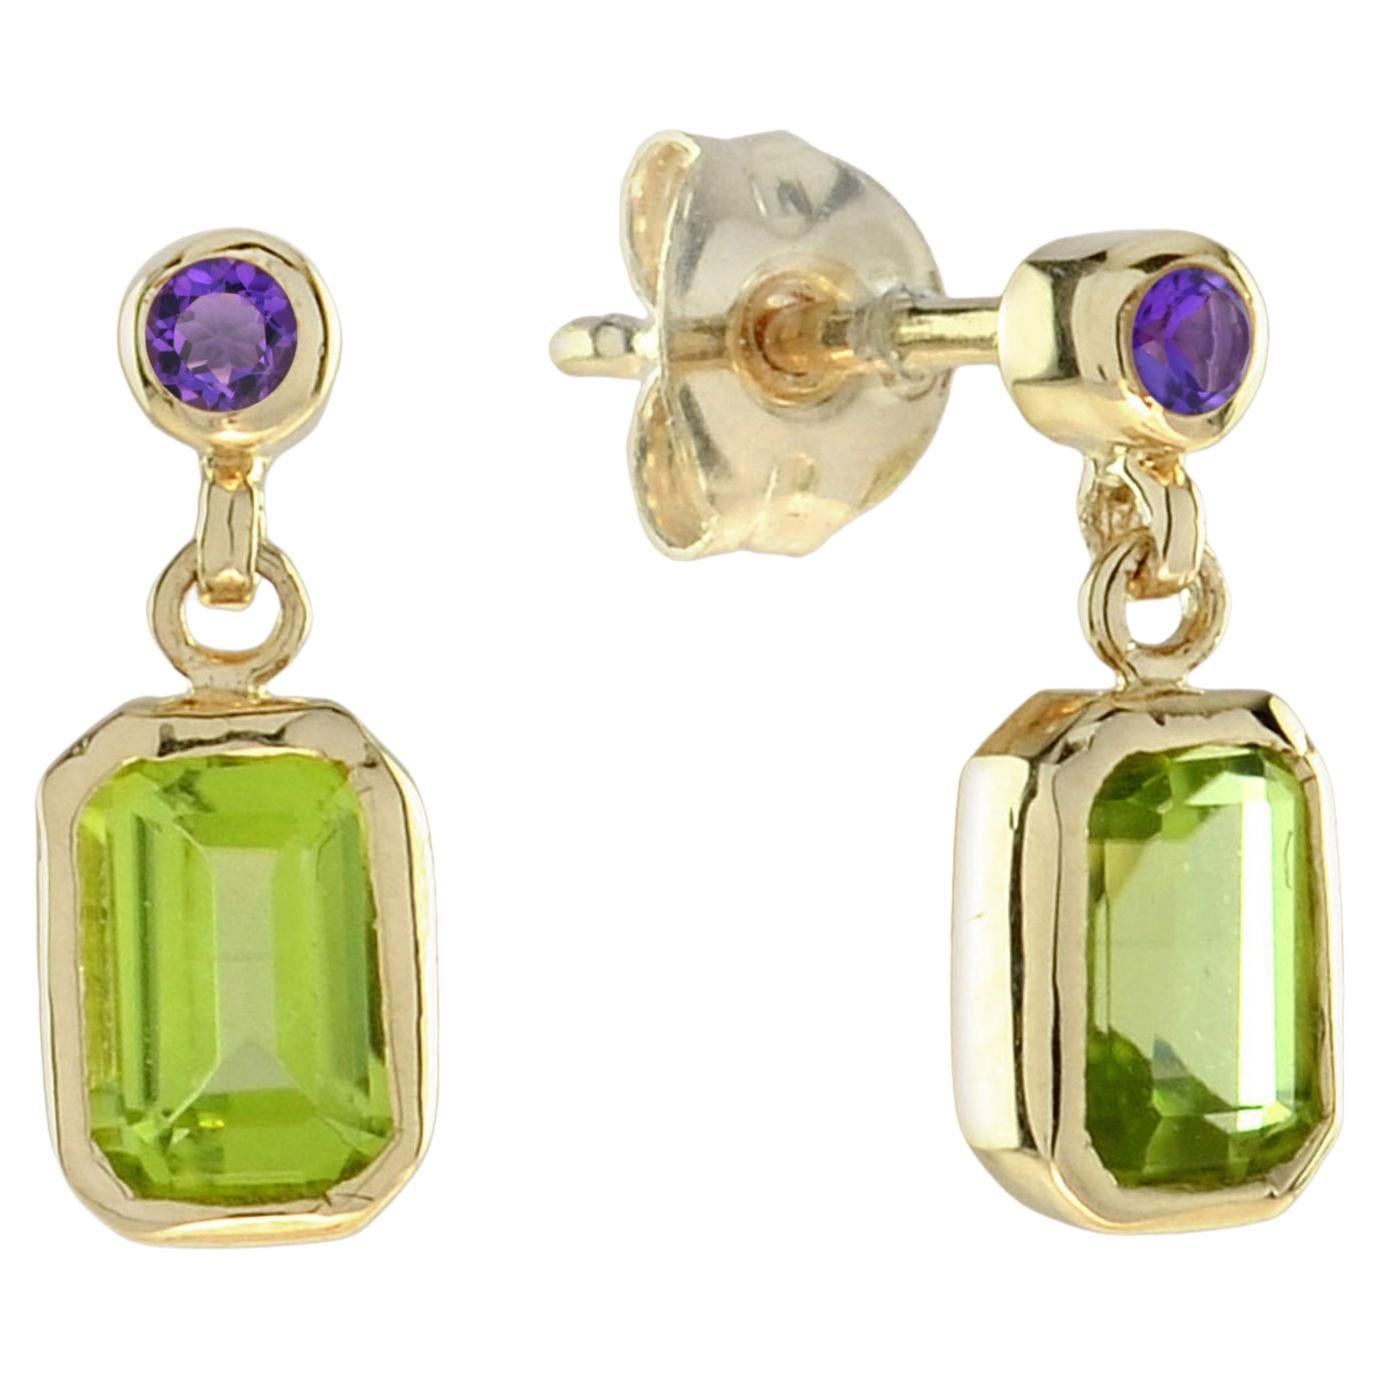 Peridot and Amethyst Vintage Style Drop Earrings in 14K Yellow Gold